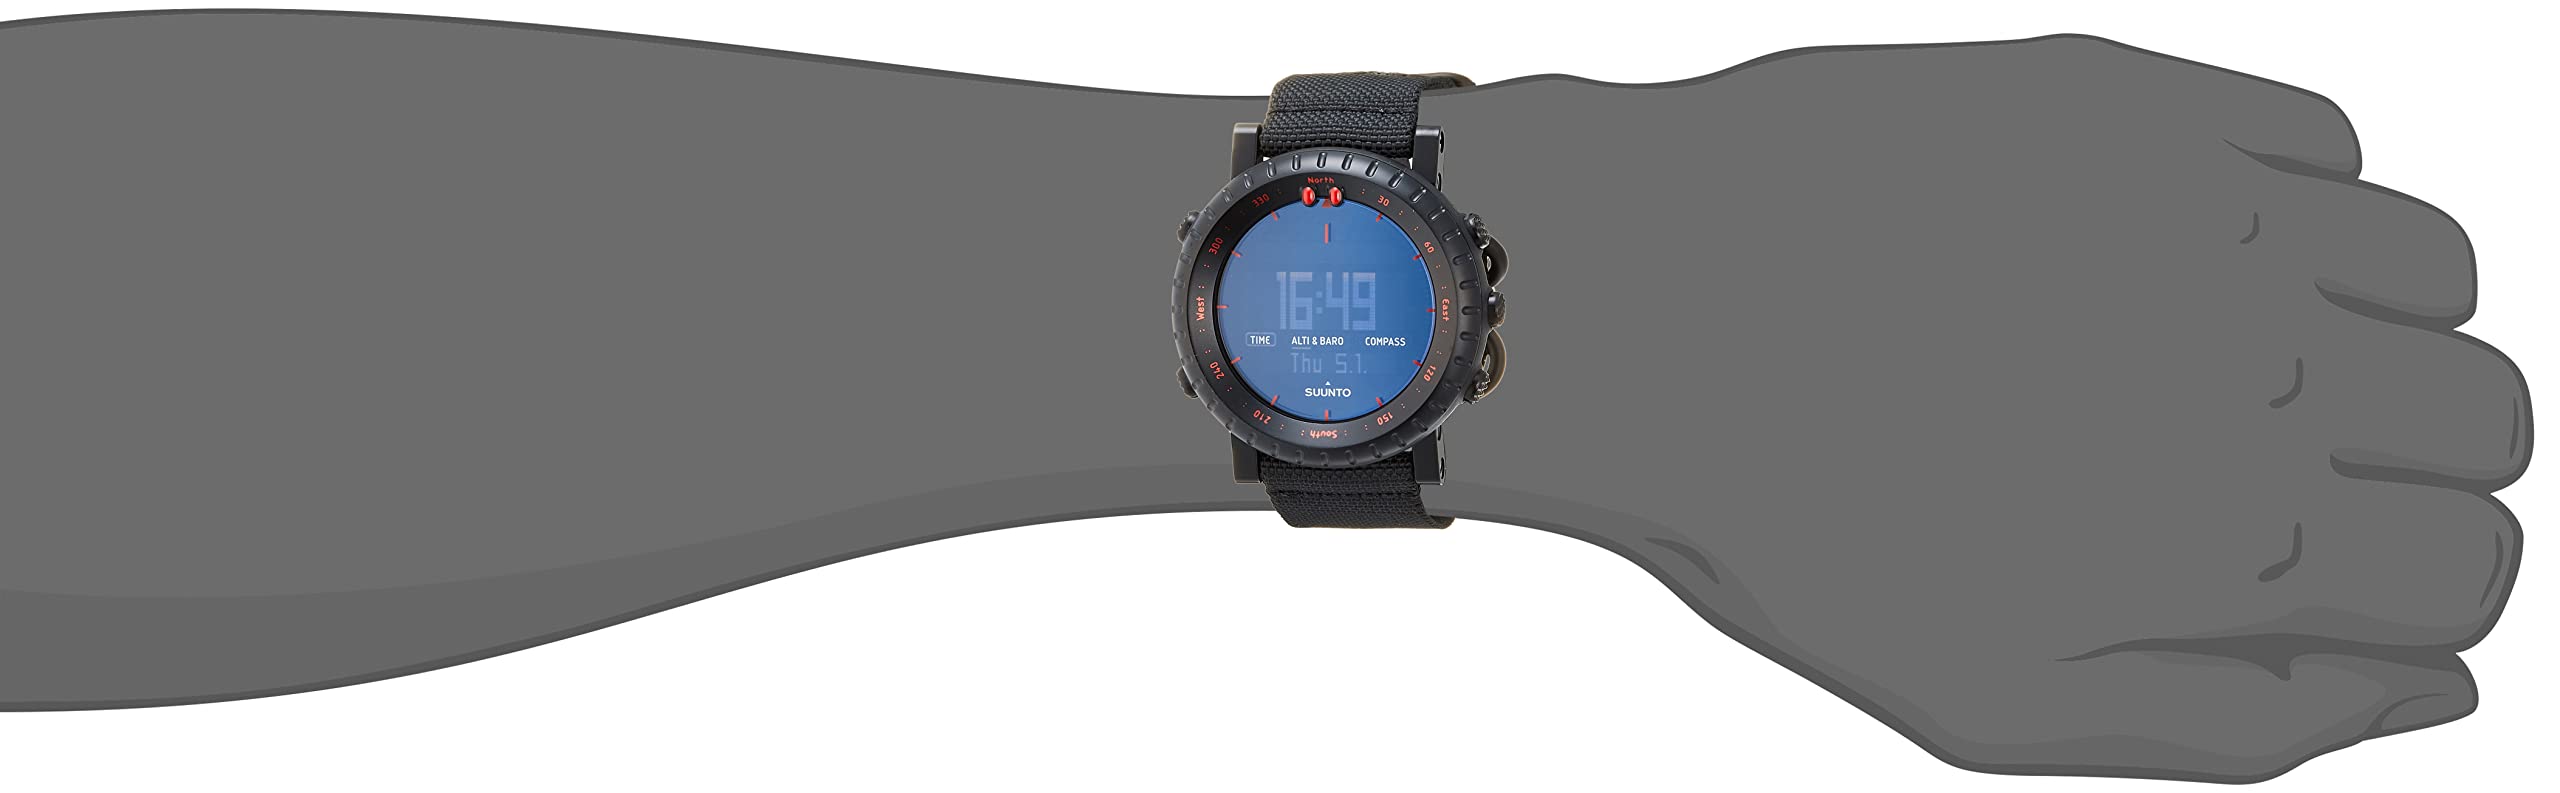 Suunto Core Outdoor Sports Watch with Altimeter, Barometer and Compass